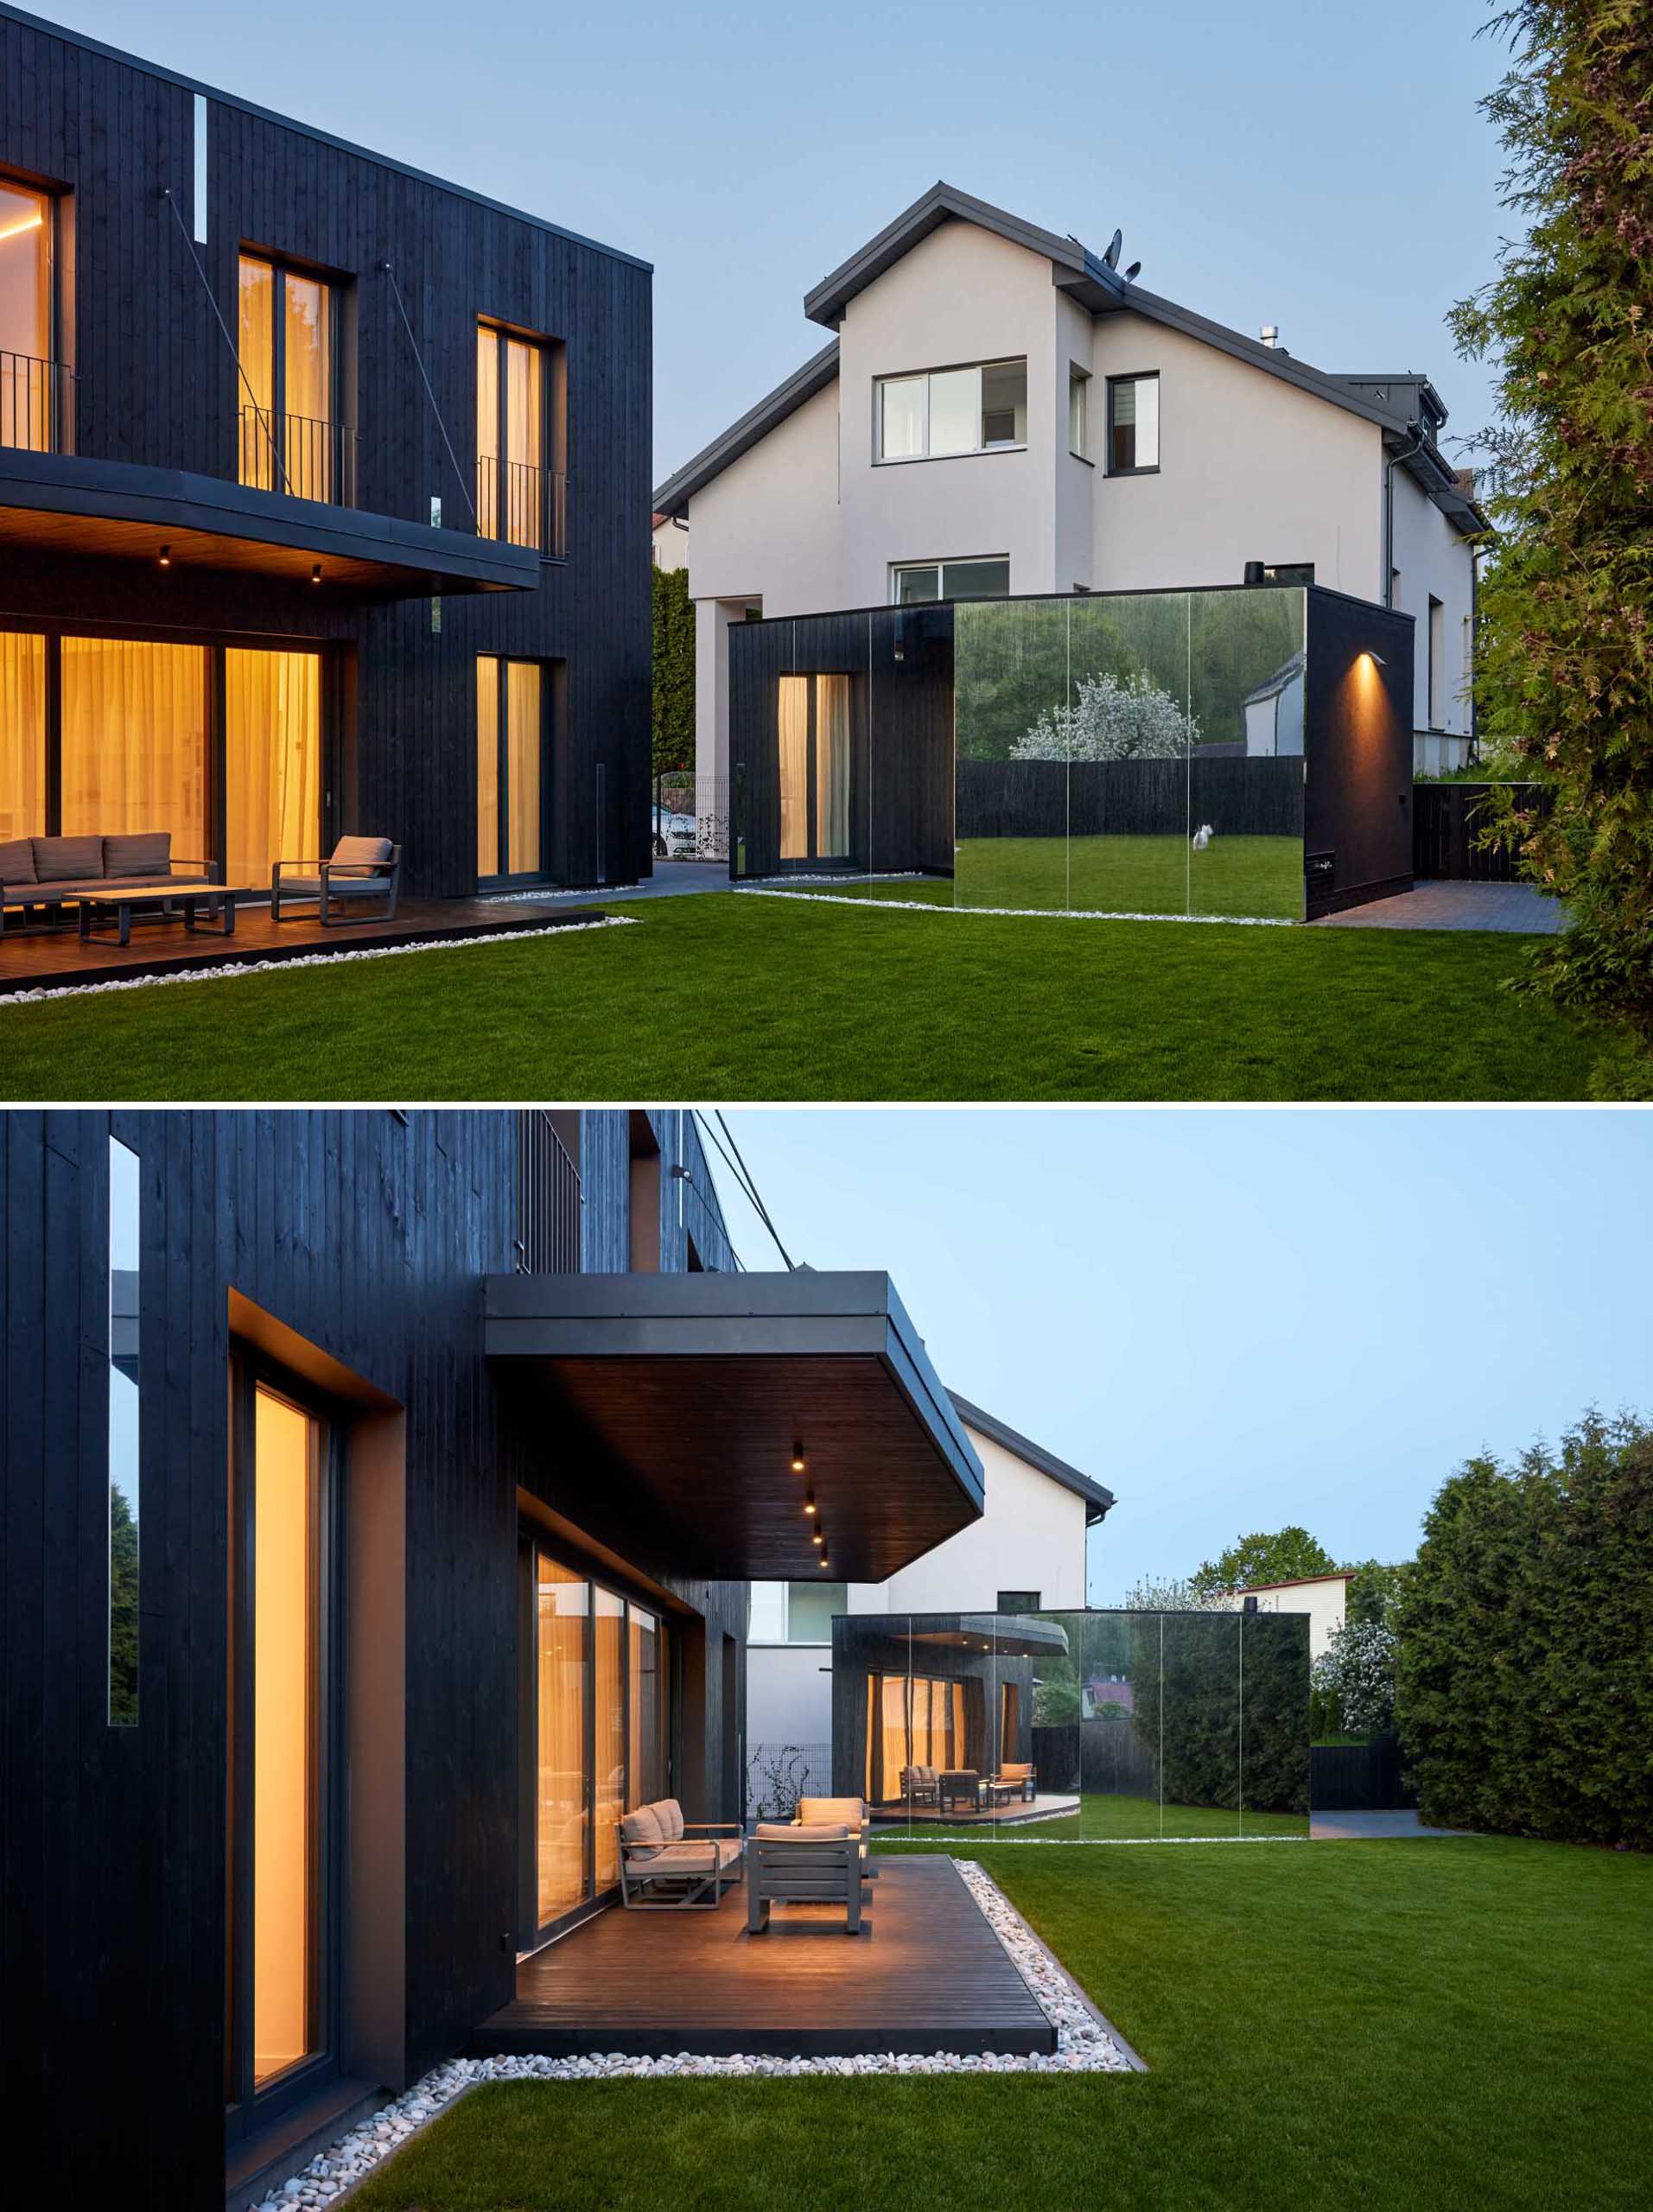 A modern home with a detached garage that has a mirrored exterior wall.